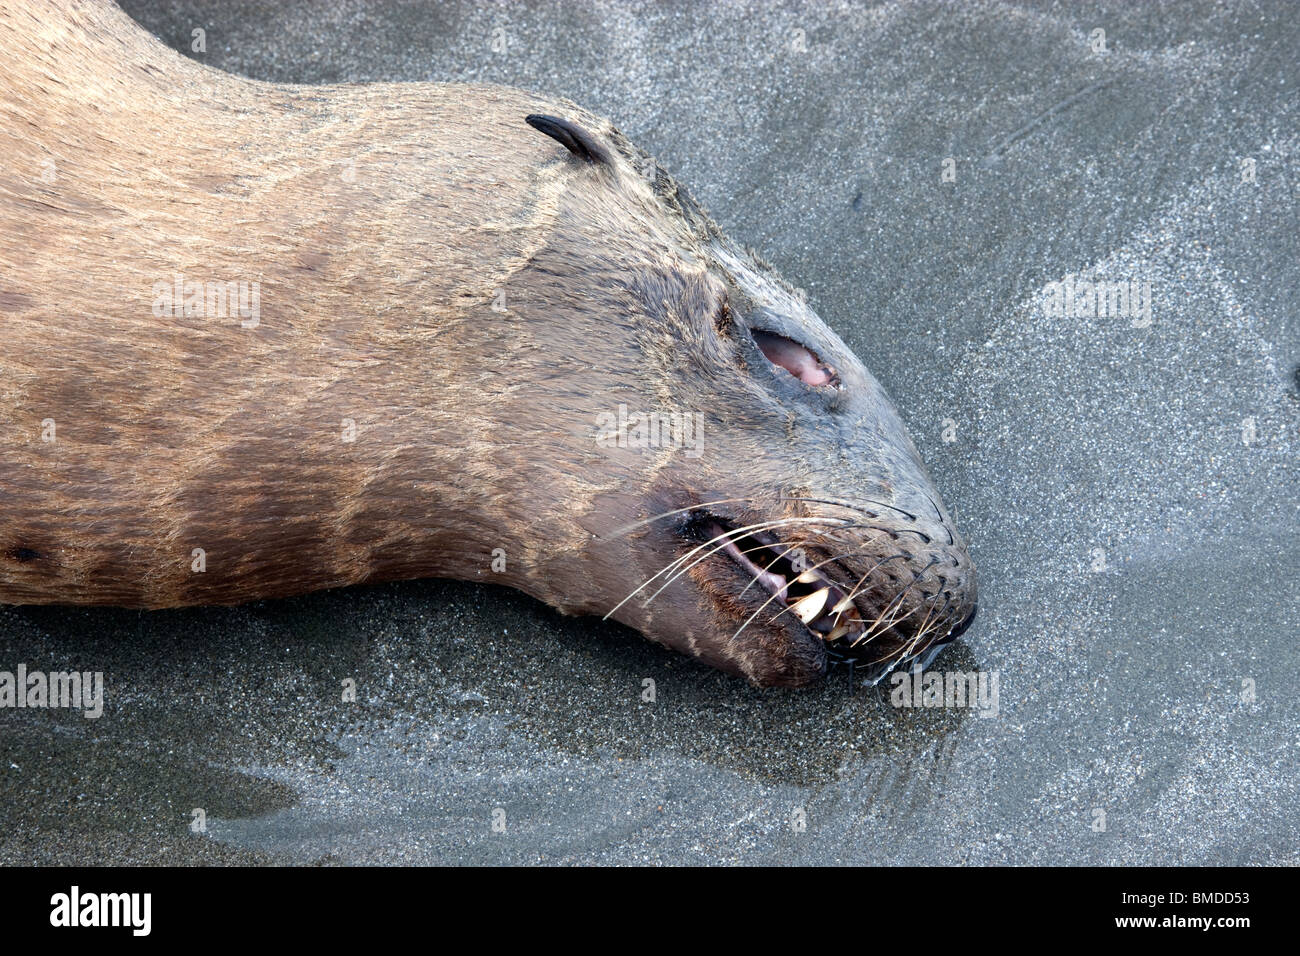 Portrait, immature Sea Lion 'yearling' deceased, beach. Stock Photo